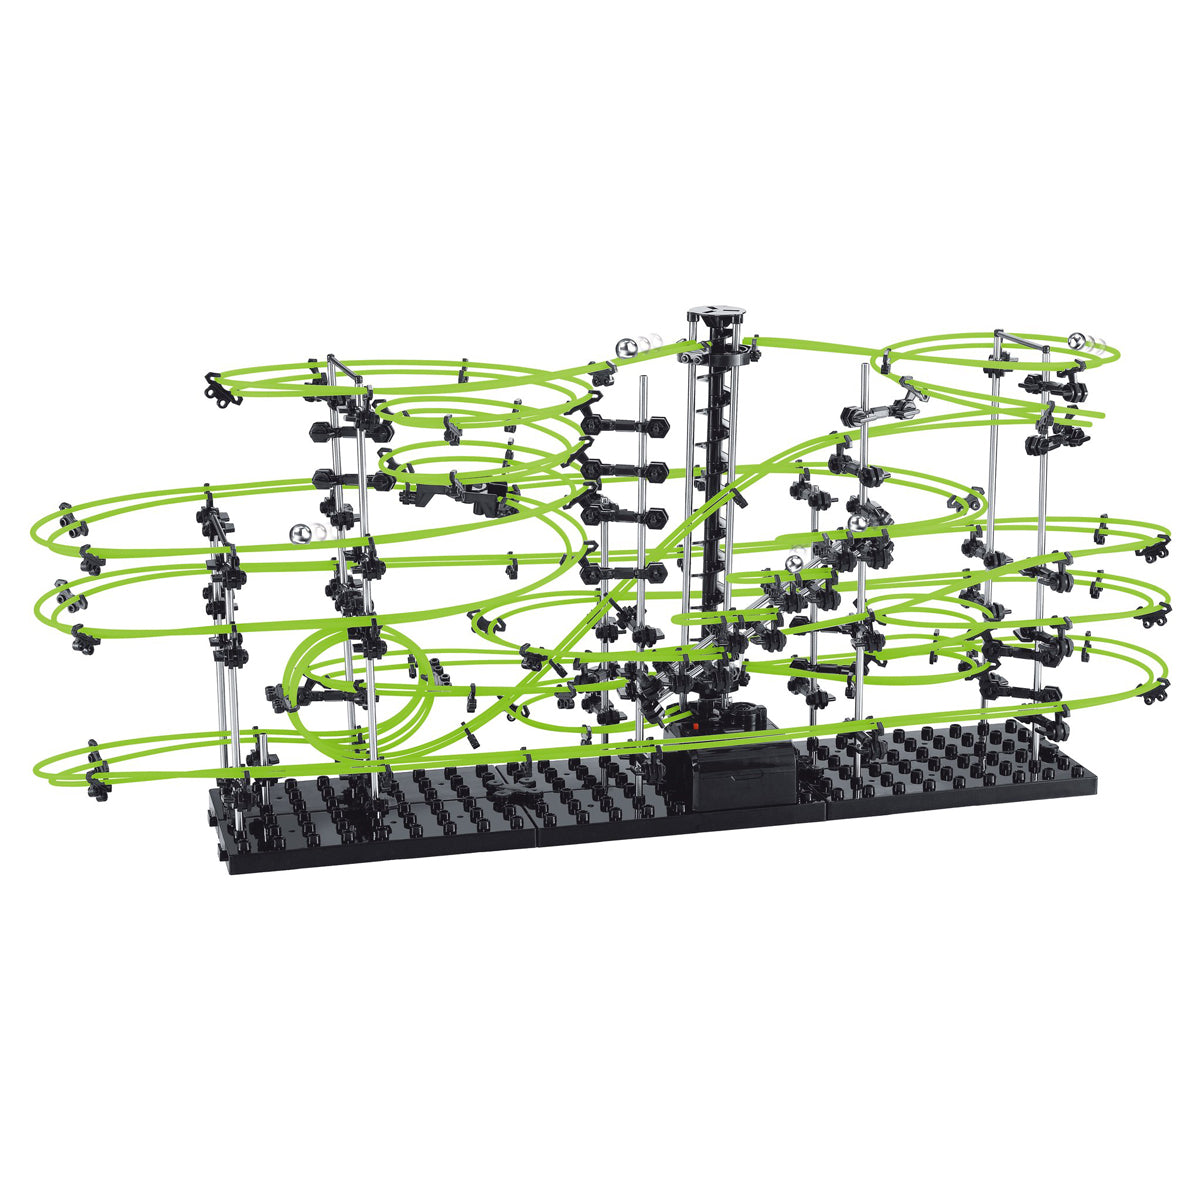 ''SpaceRail Level 4.2 Glow in the Dark 22,000mm Rail, Roller Coaster Building Set, Marble Roller Coas